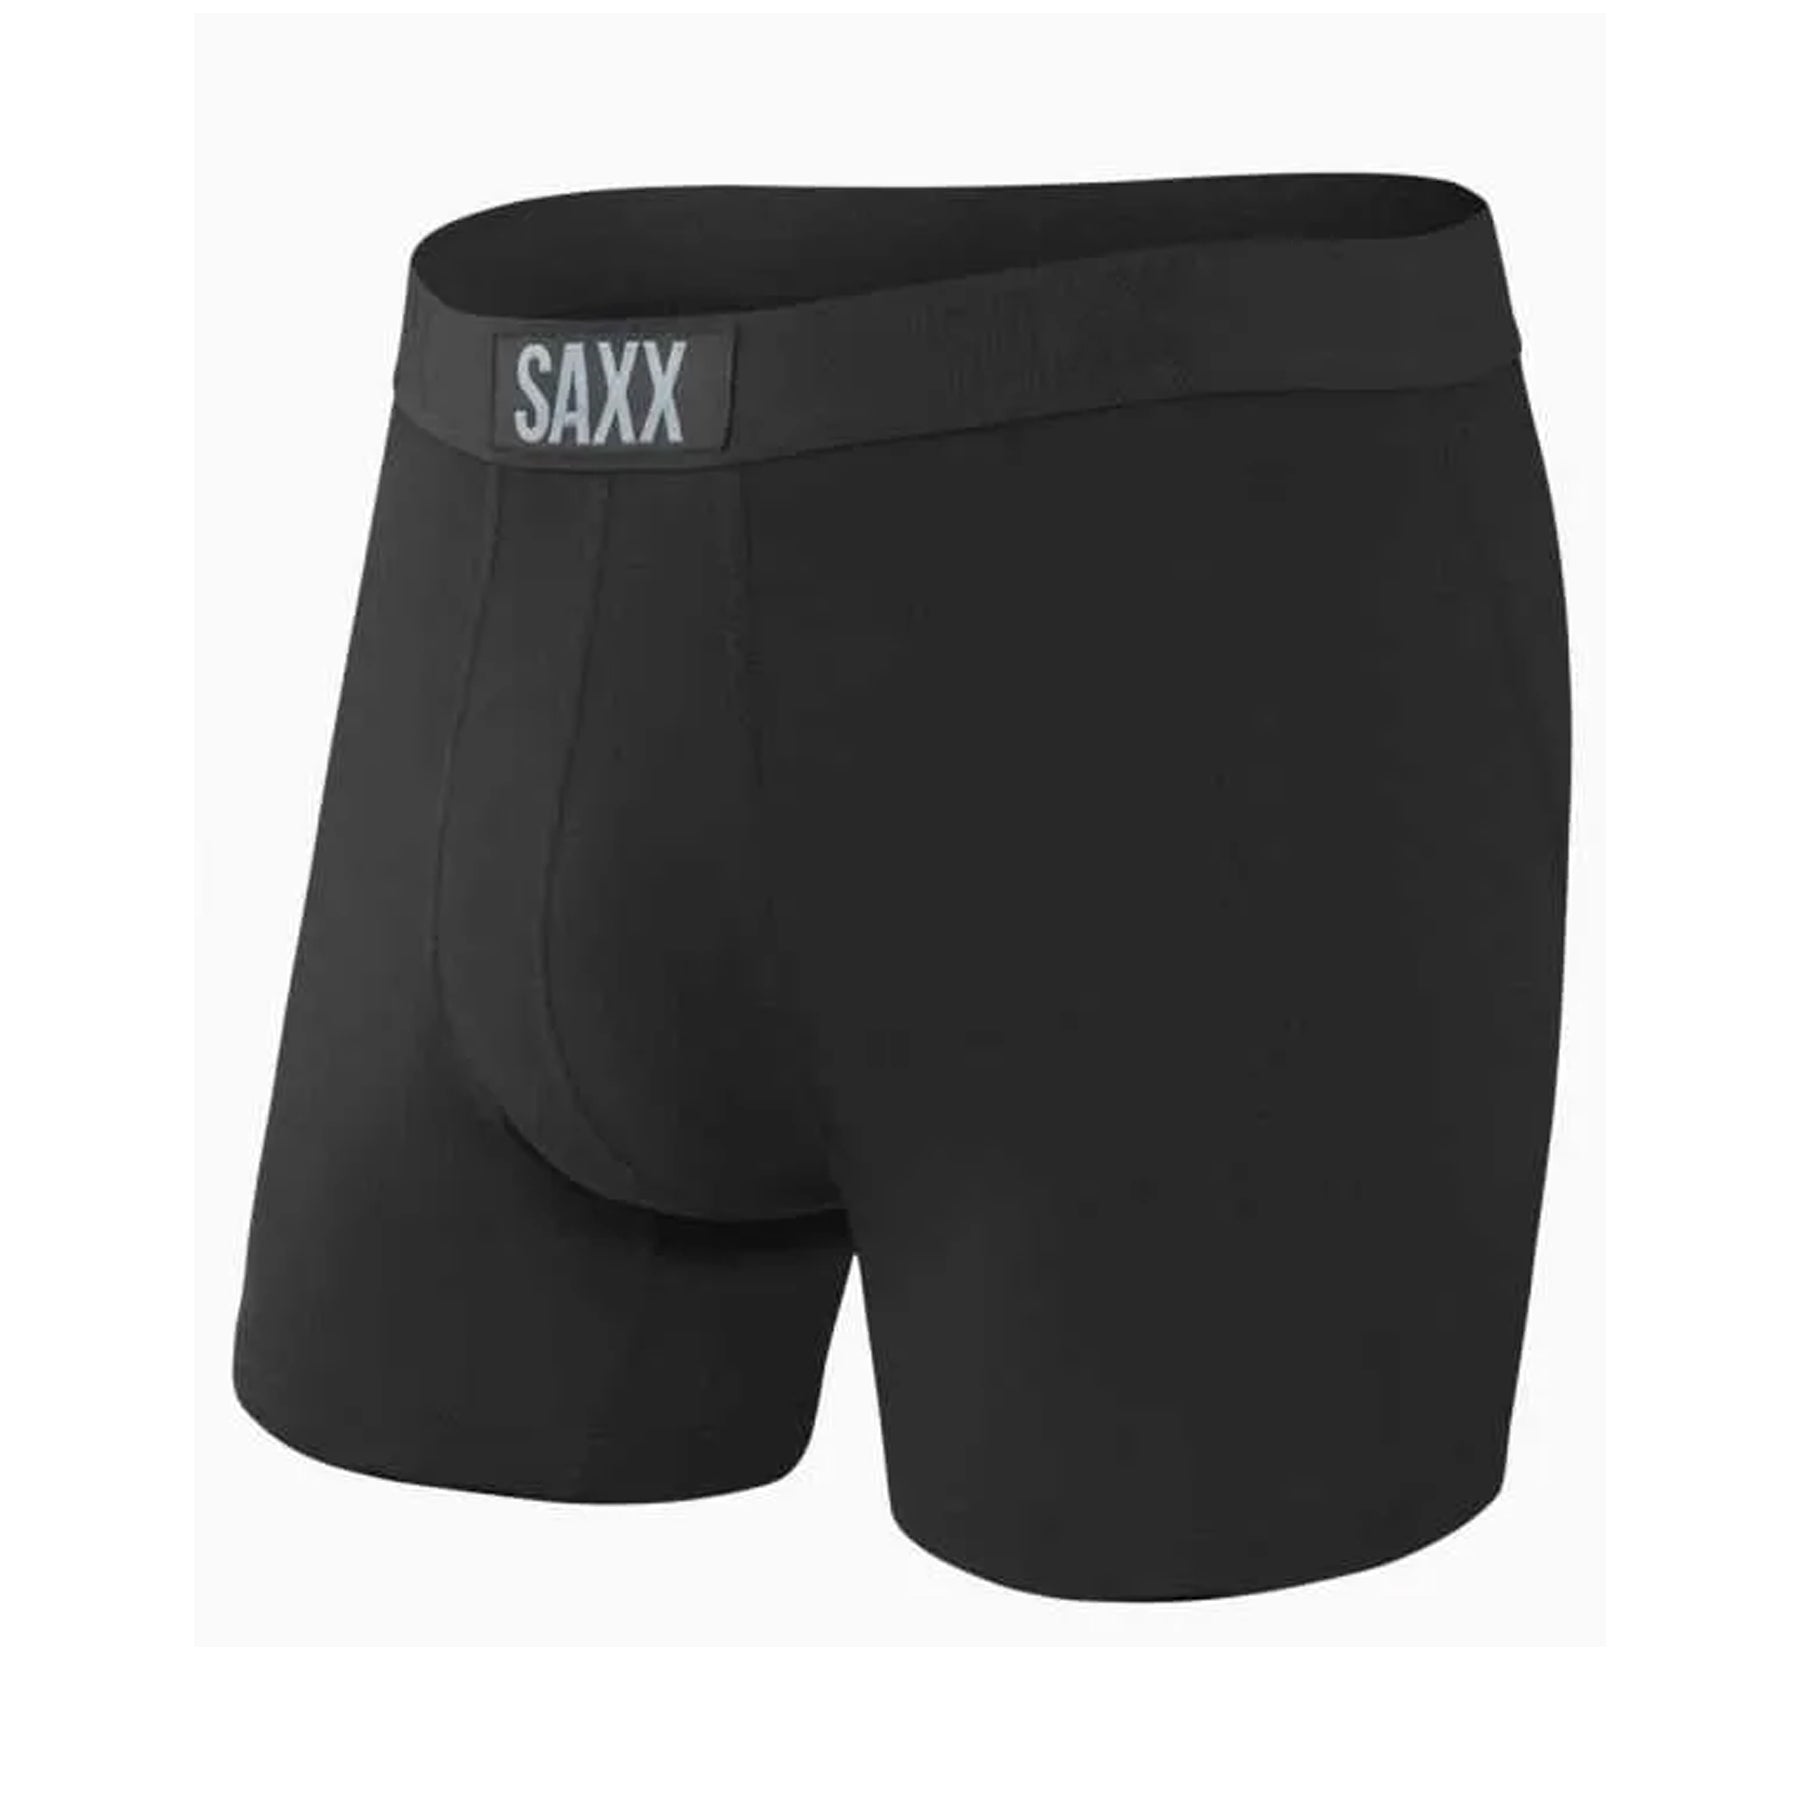 Men's Boxers by SAXX: Ultimate Comfort. Great Styles